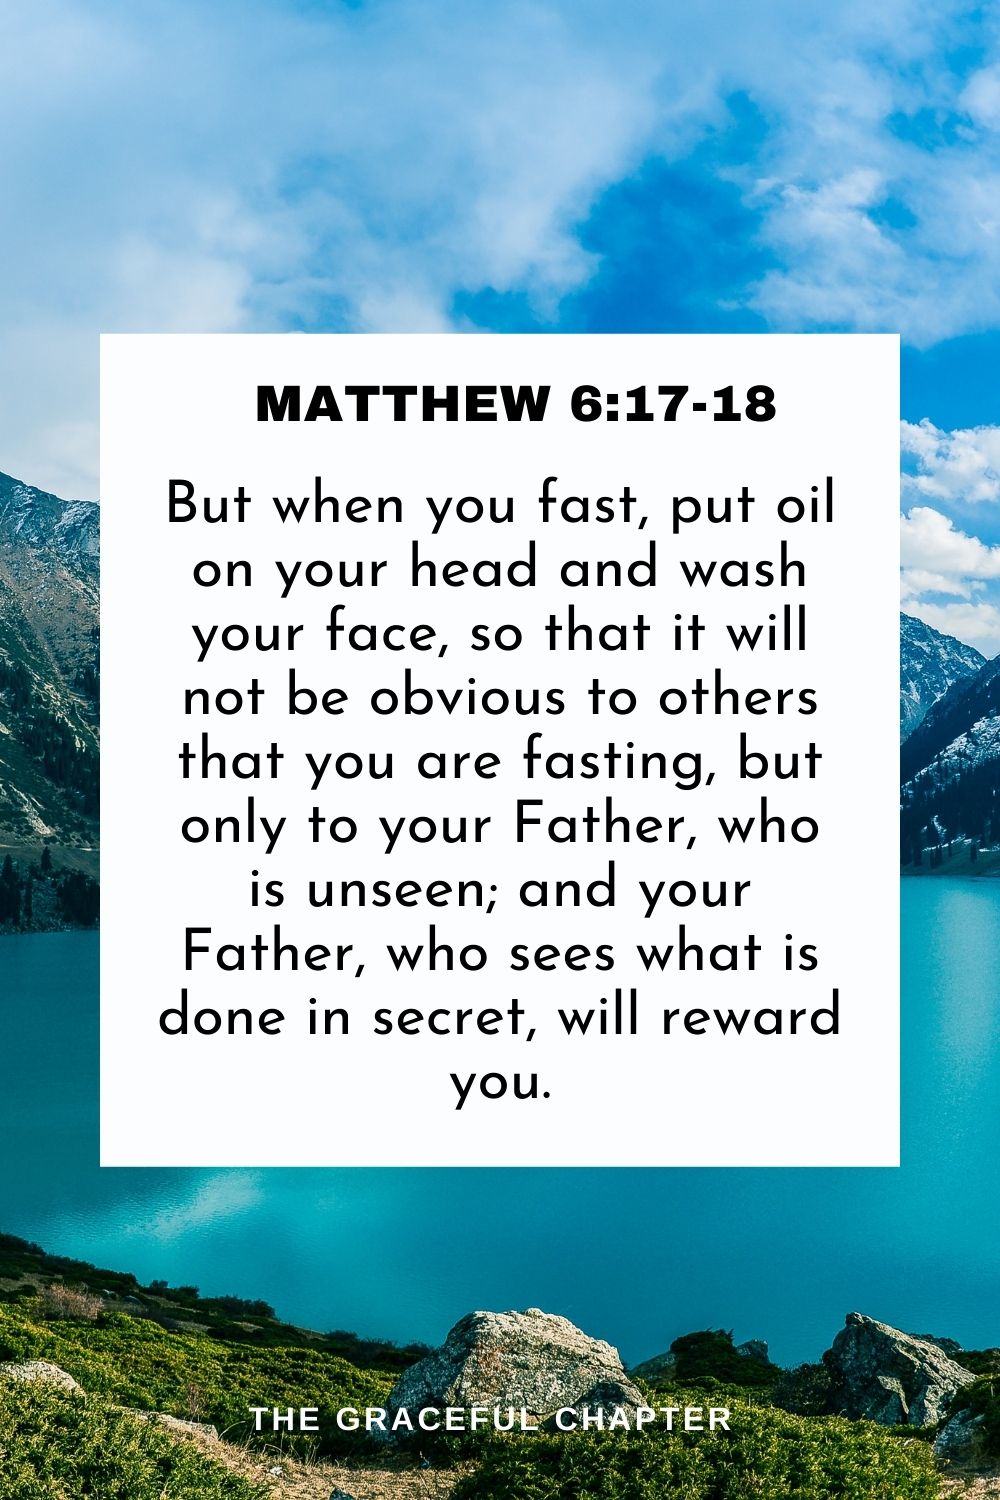 But when you fast, put oil on your head and wash your face, so that it will not be obvious to others that you are fasting, but only to your Father, who is unseen; and your Father, who sees what is done in secret, will reward you. Matthew 6:17-18